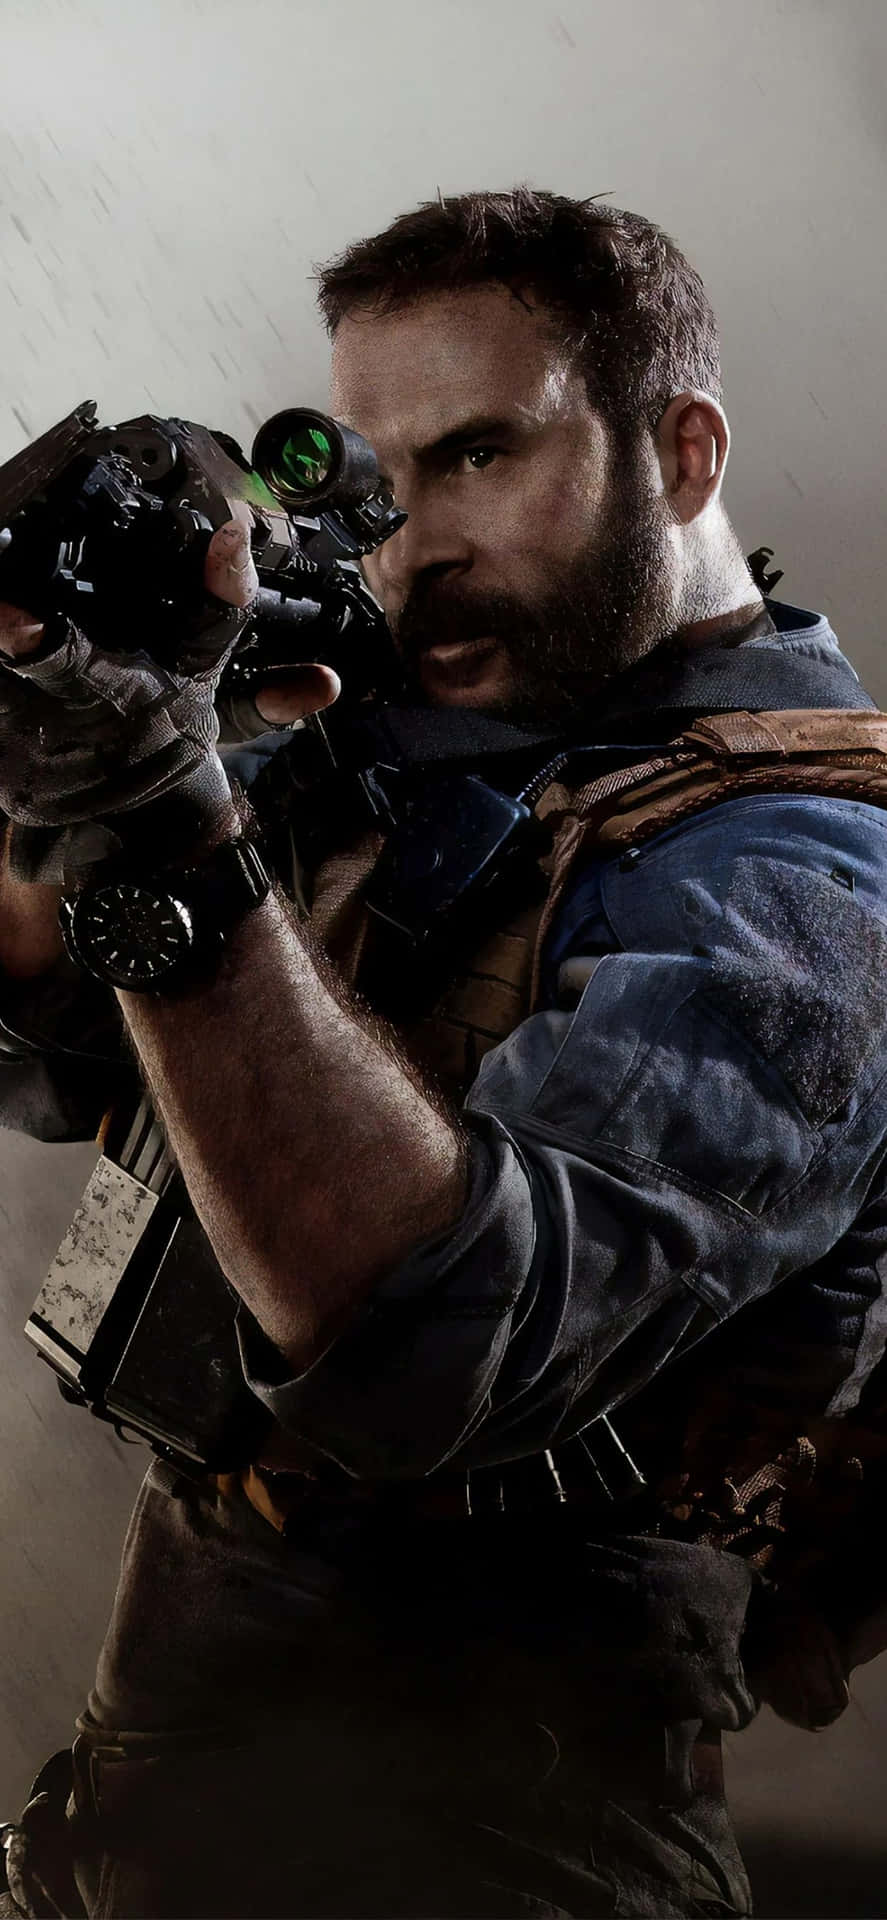 Call Of Duty Modern Warfare Captain Price Iphone Background